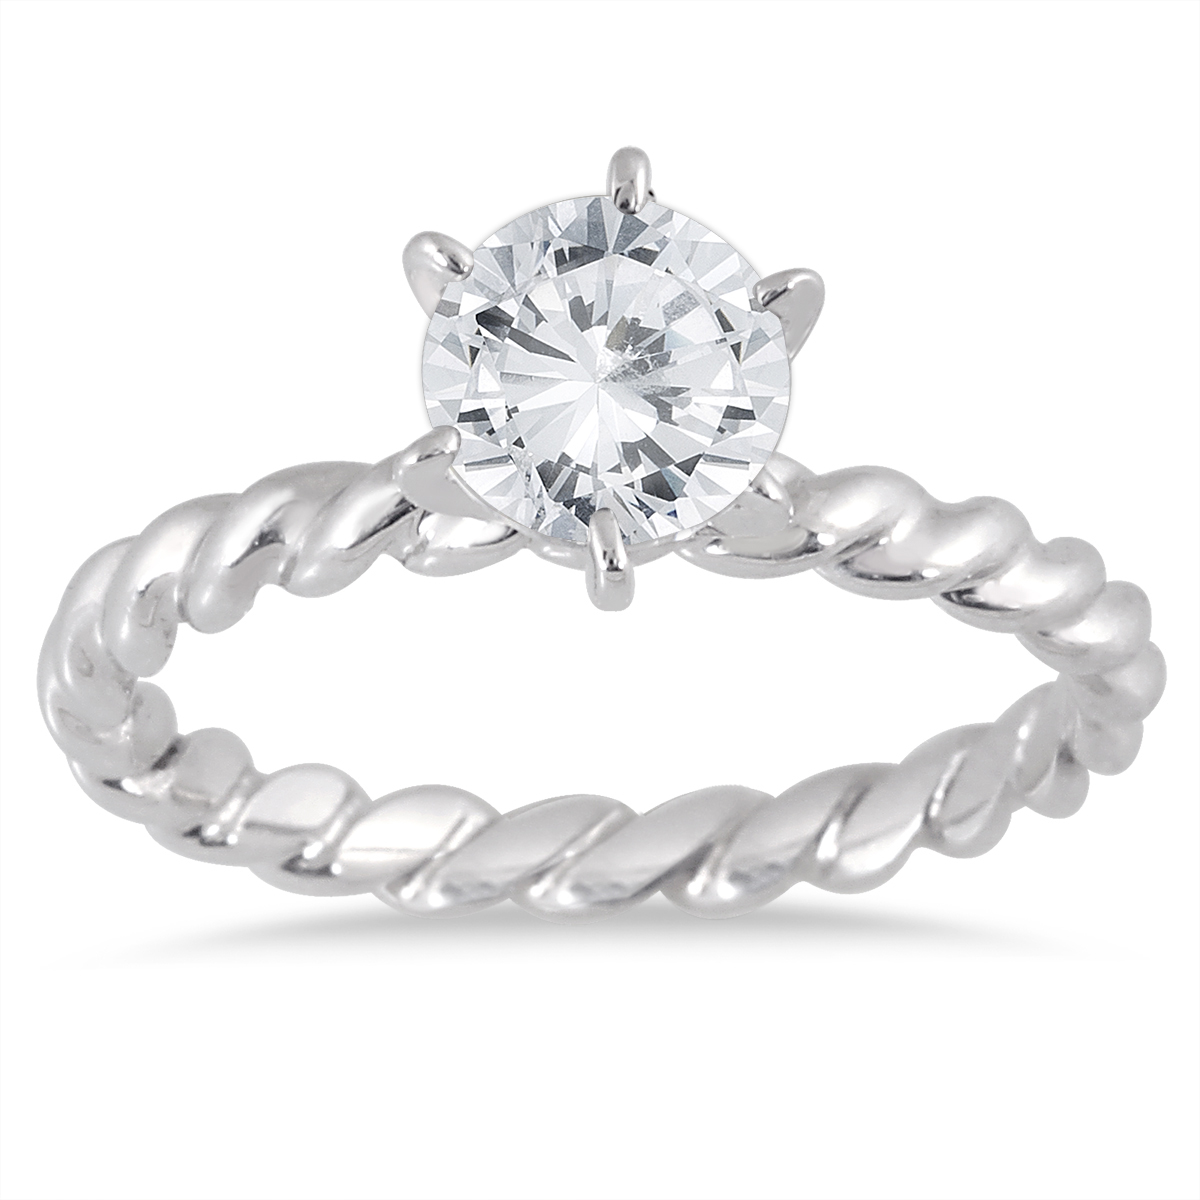 AGS Certified 1 Carat Braided Solitaire Diamond Ring in 14K White Gold (J-K Color, I2-I3 Clarity)